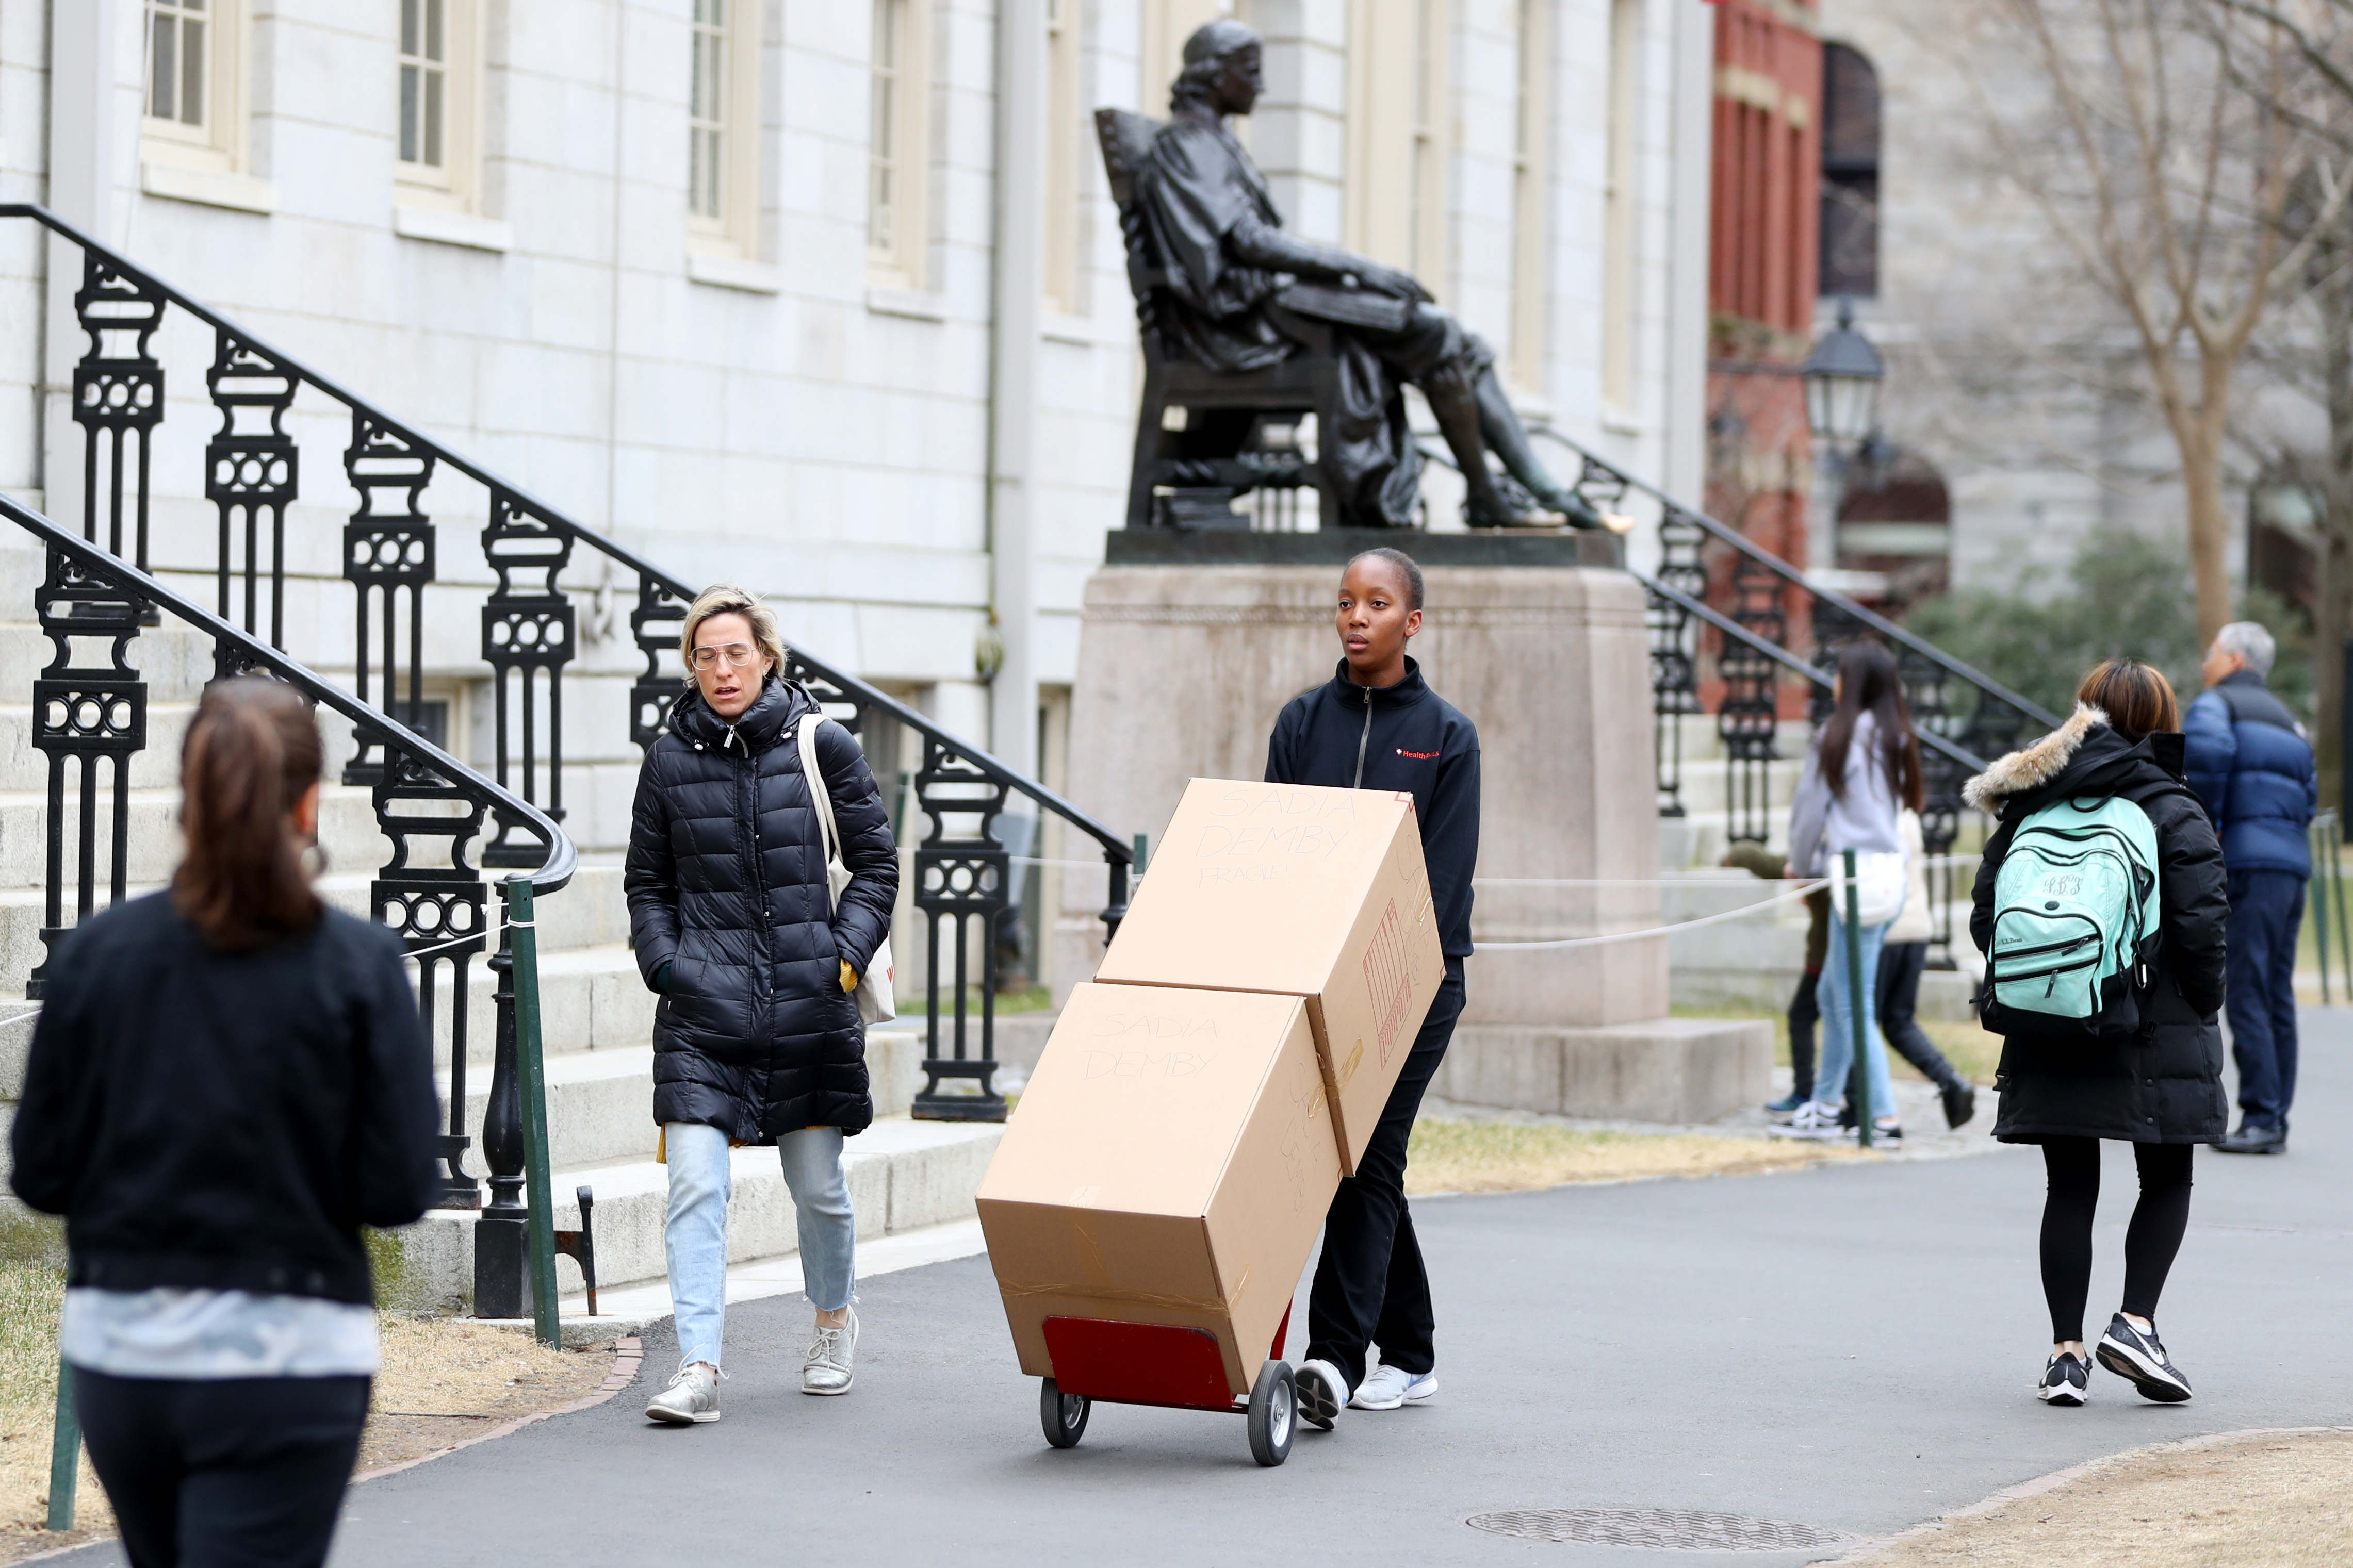 CAMBRIDGE, MASSACHUSETTS - MARCH 12: Sophomore Sadia Demby moves her belongings through Harvard Yard on the campus of Harvard University on March 12, 2020 in Cambridge, Massachusetts. Students have been asked to move out of their dorms by March 15 due to the Coronavirus (COVID-19) risk. All classes will be moved online for the rest of the spring semester. (Photo by Maddie Meyer/Getty Images)